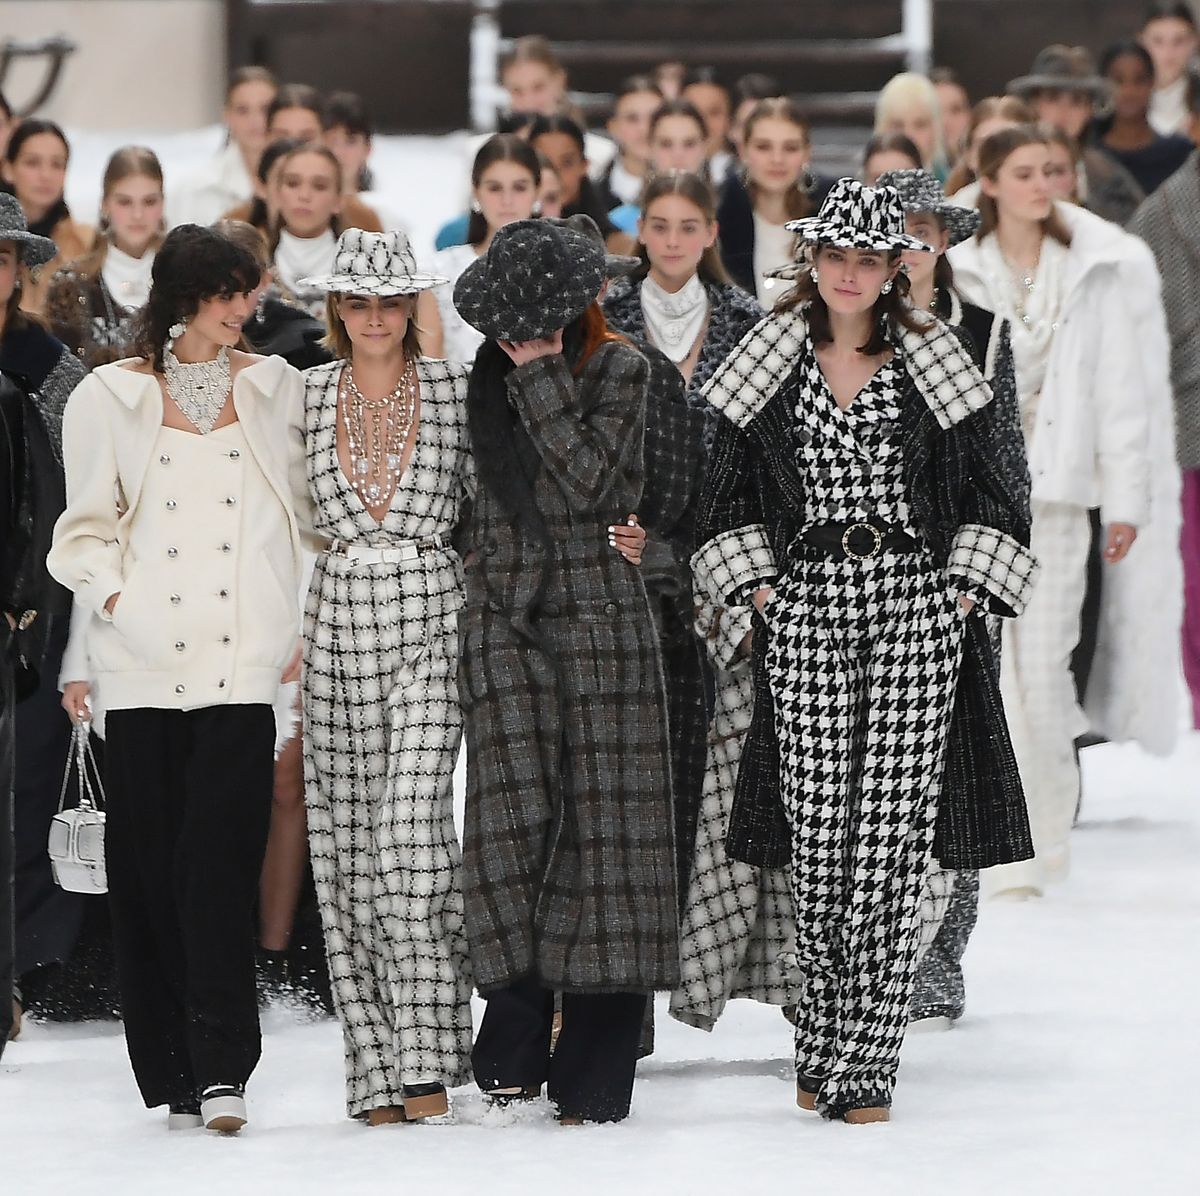 Chanel fashion show: Models and attendees left in tears after Karl